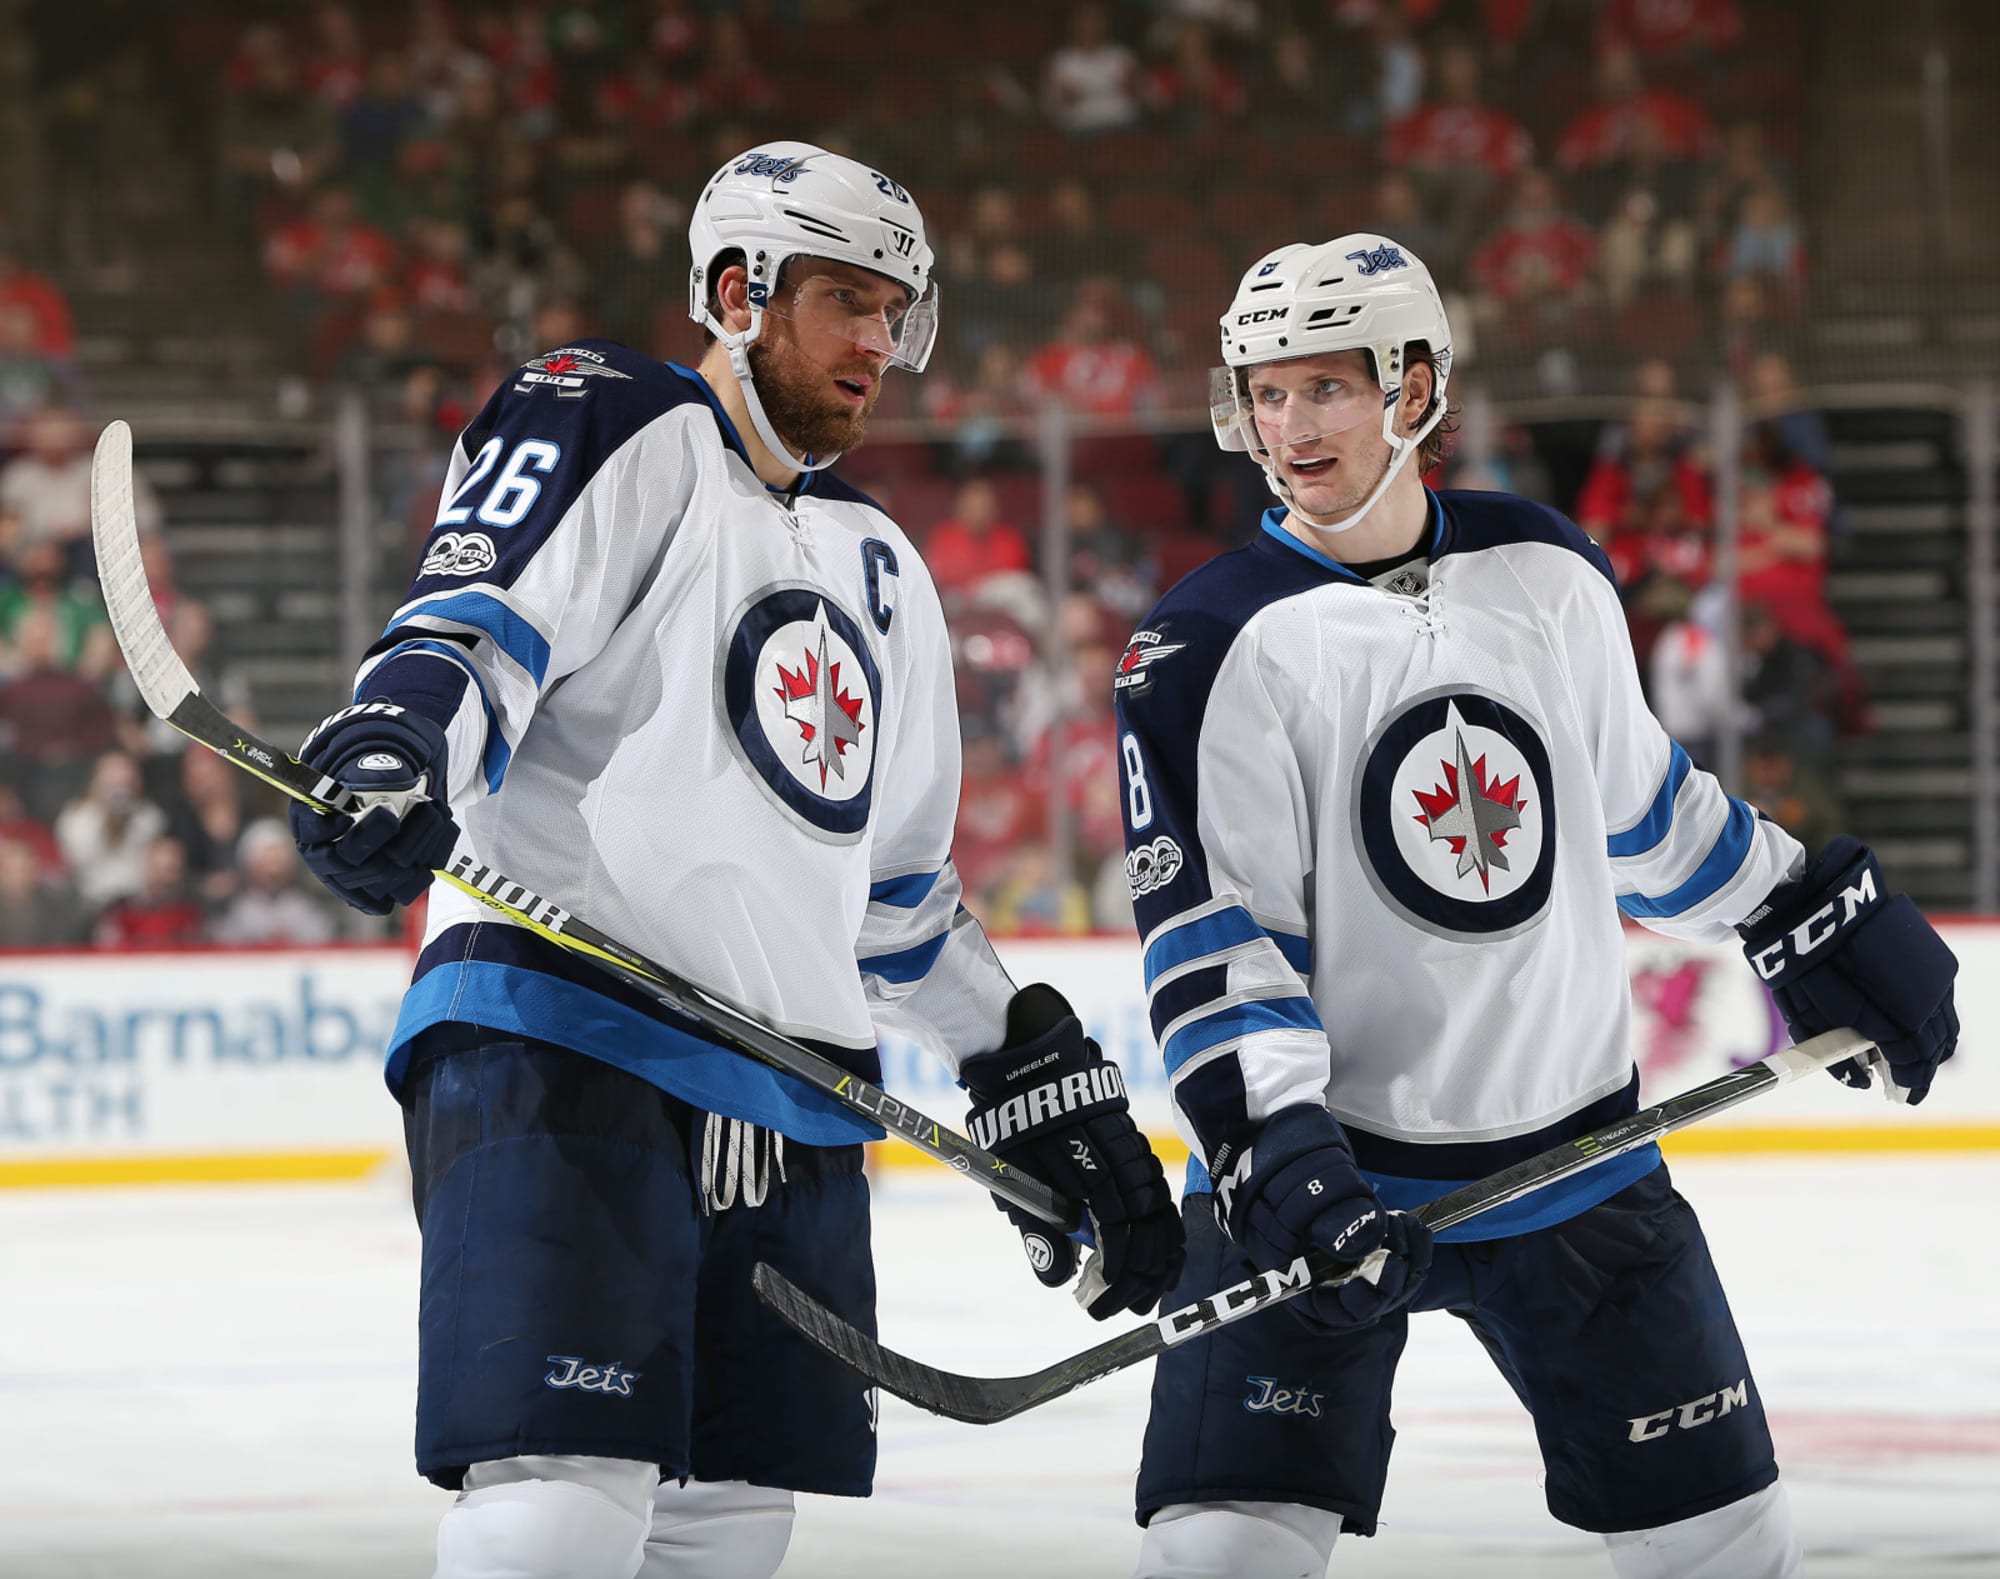 Blake Wheeler To Be Out For A While